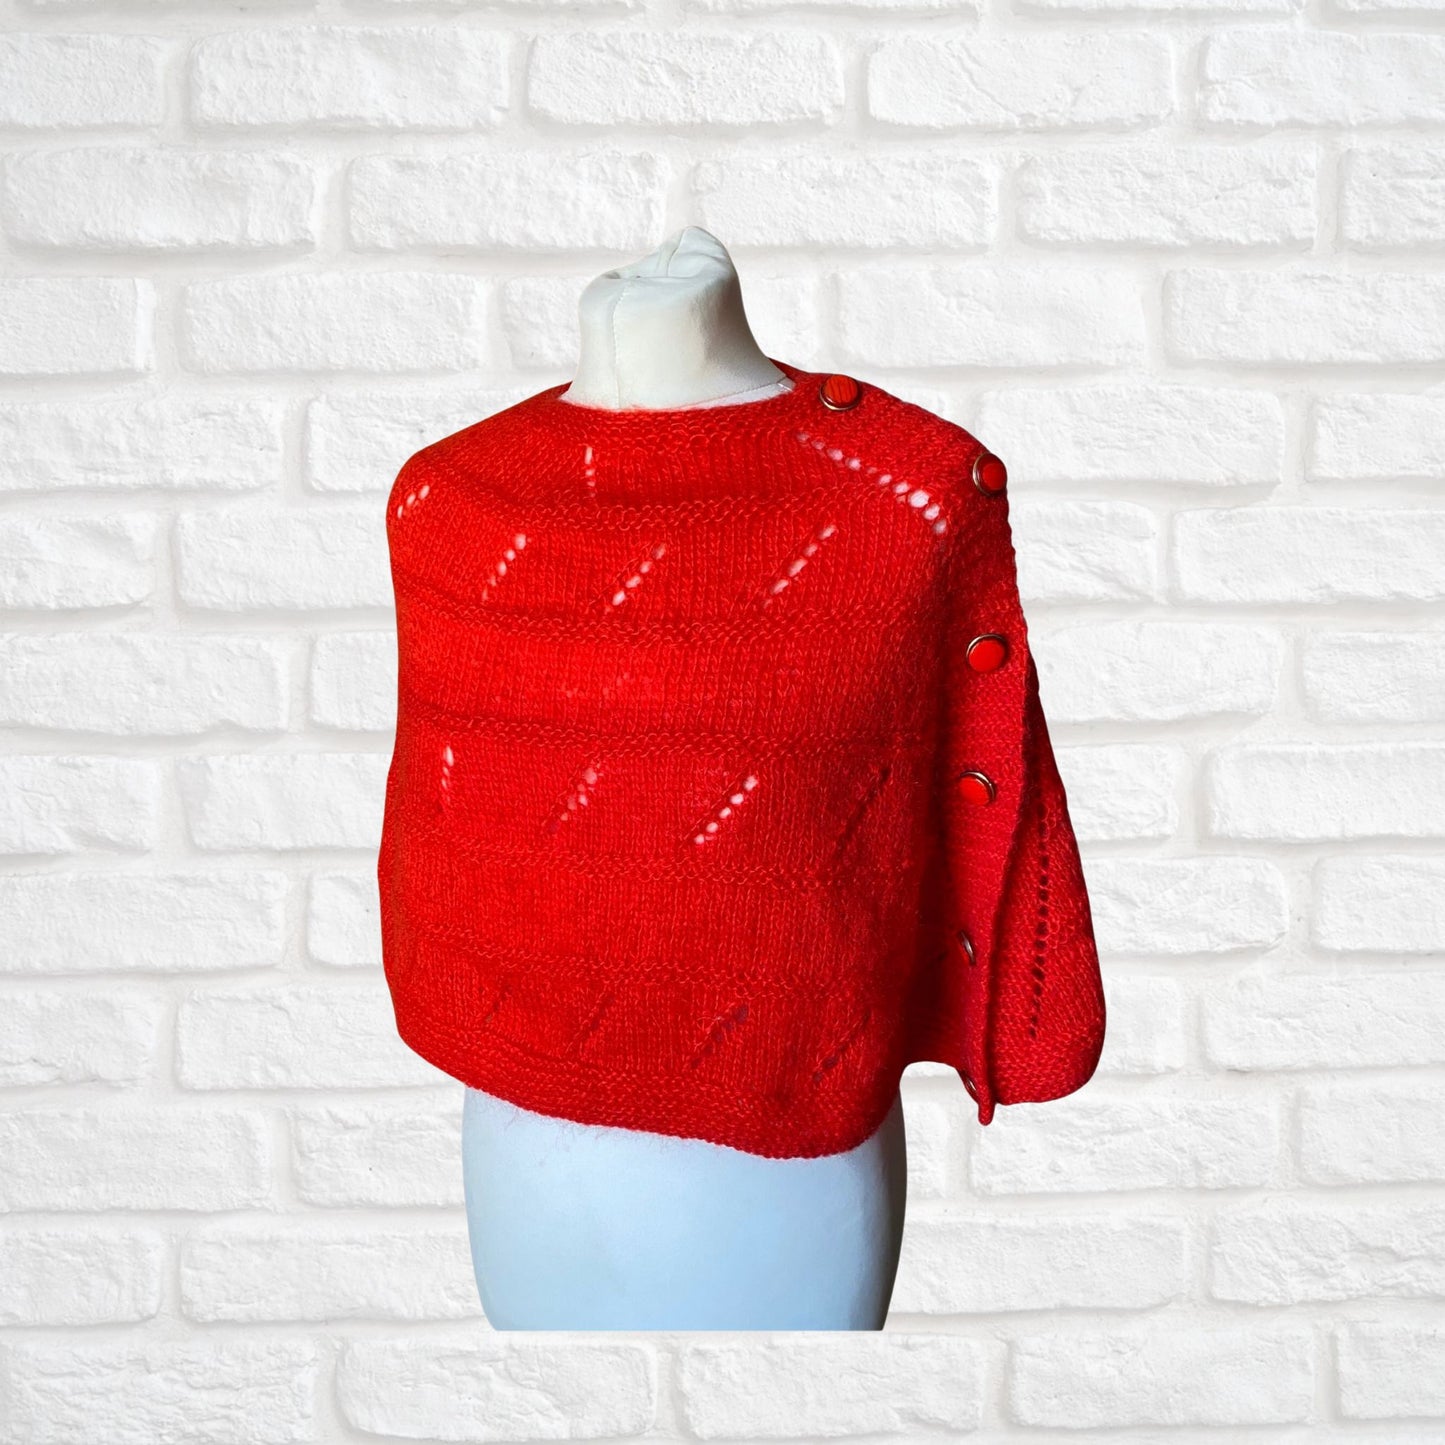 Vintage hand knitted red poncho/ cape. Approx U.K. size 8-10